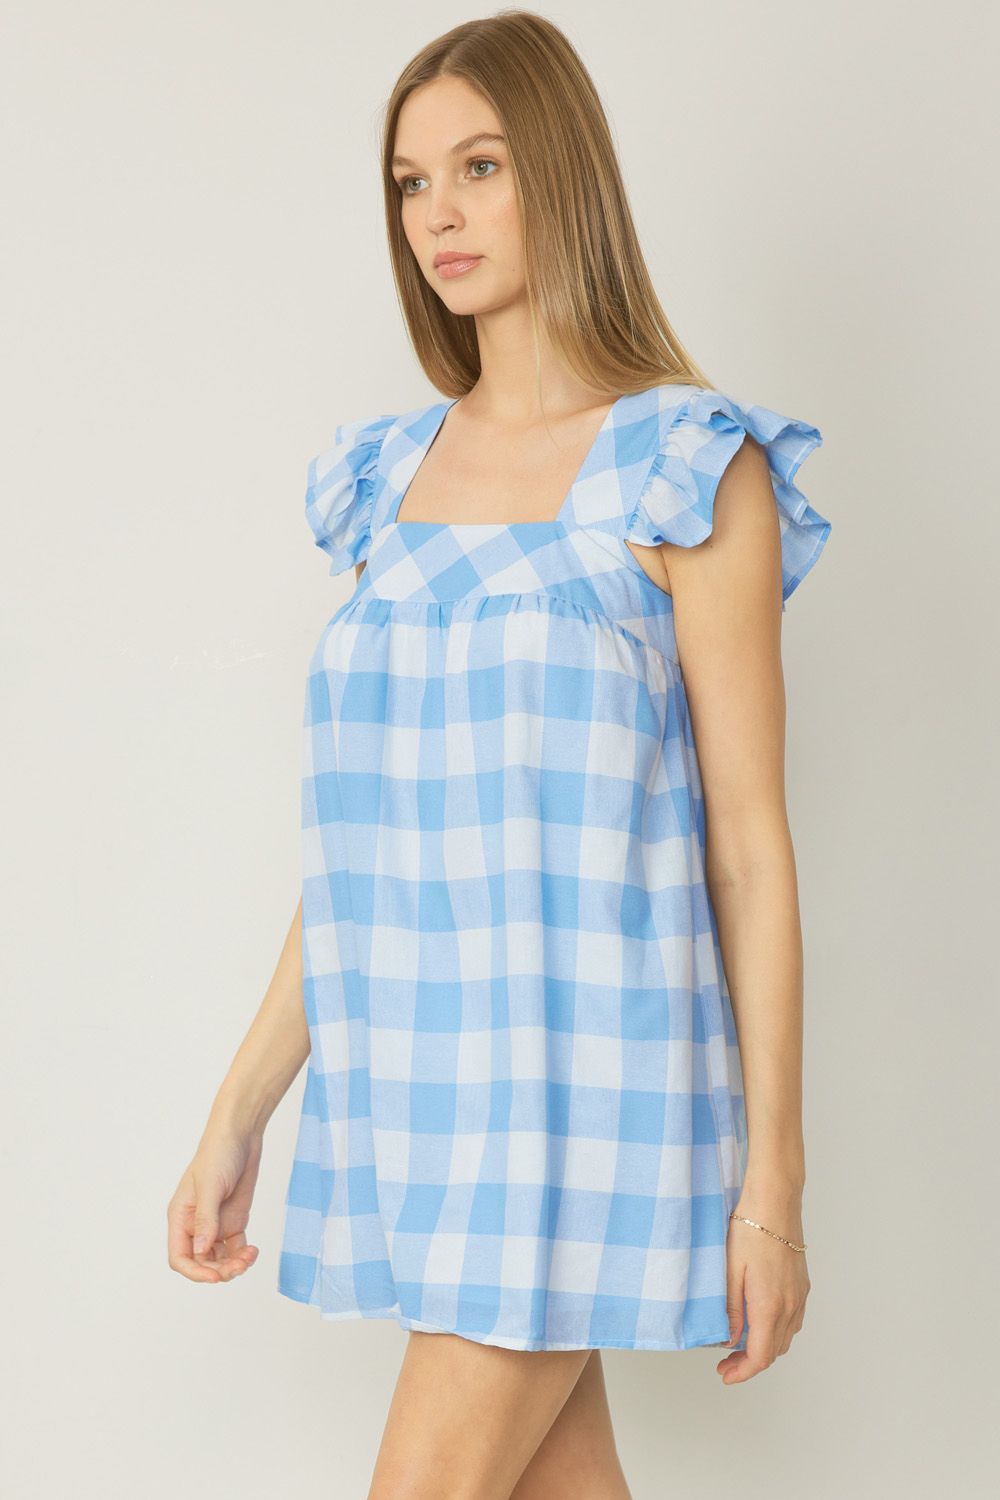 Picnic In The Park Dress - Blue